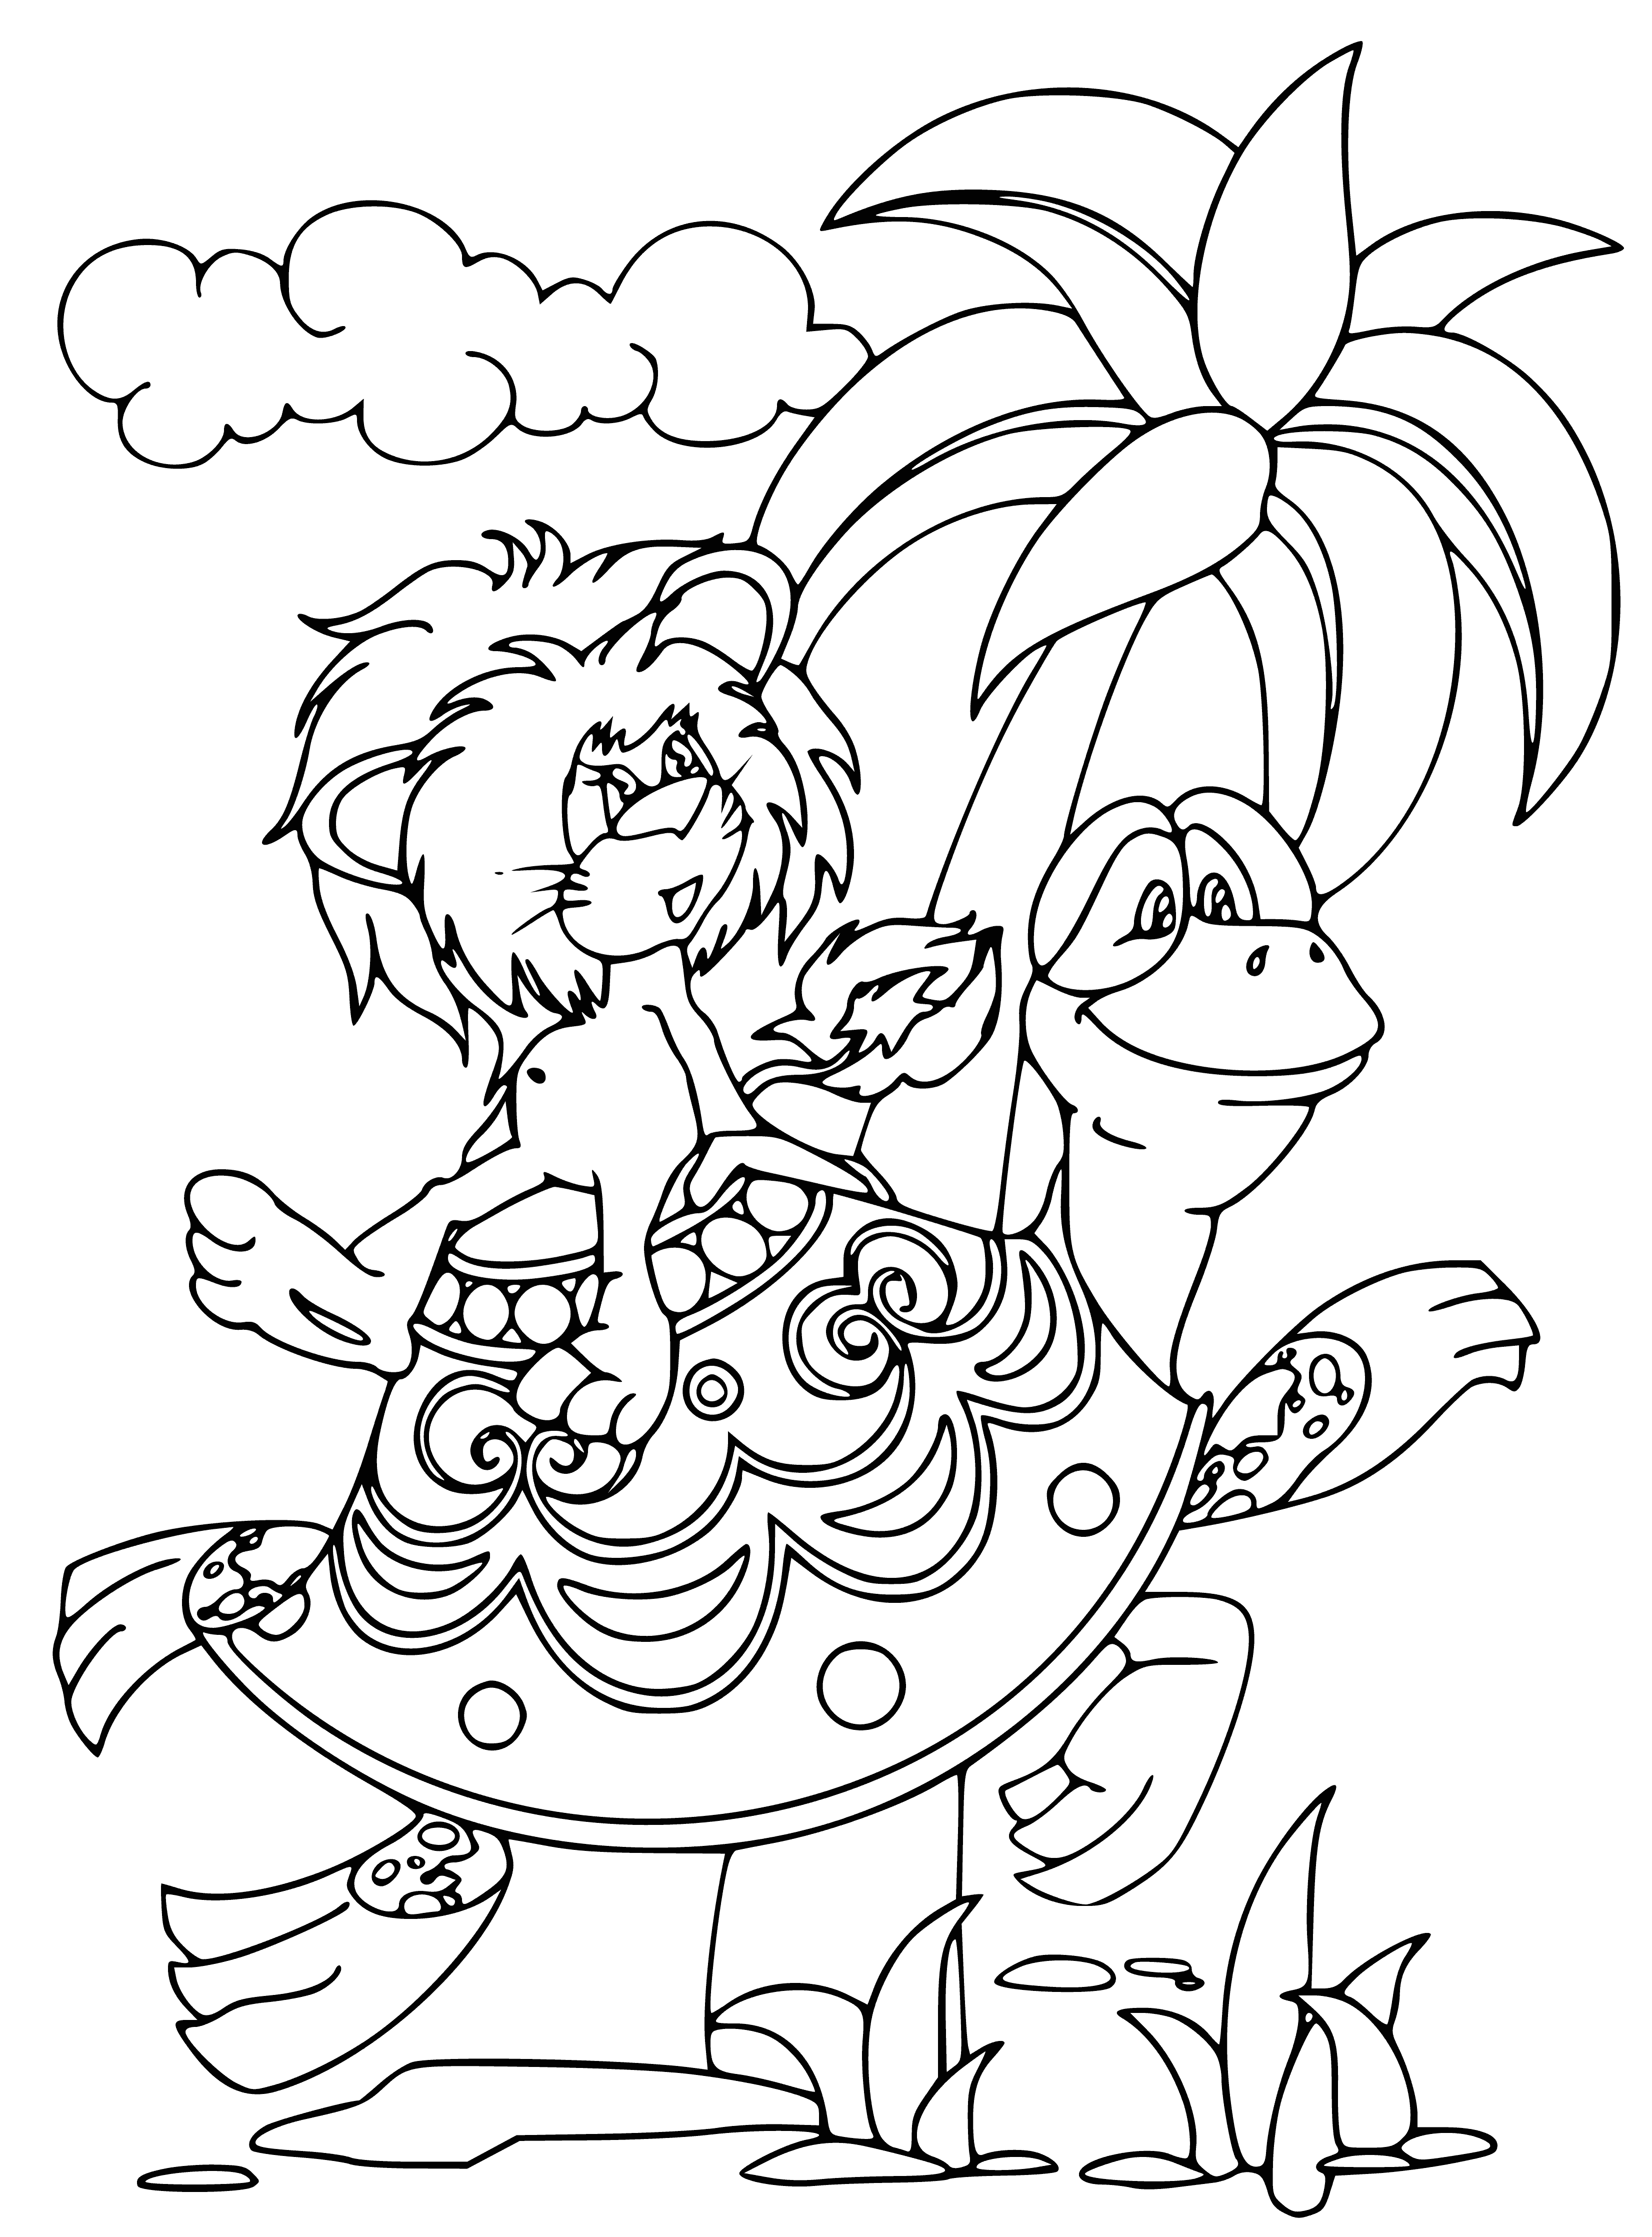 coloring page: Lion and turtle sing happily, eyes closed, in a grassy meadow with trees.